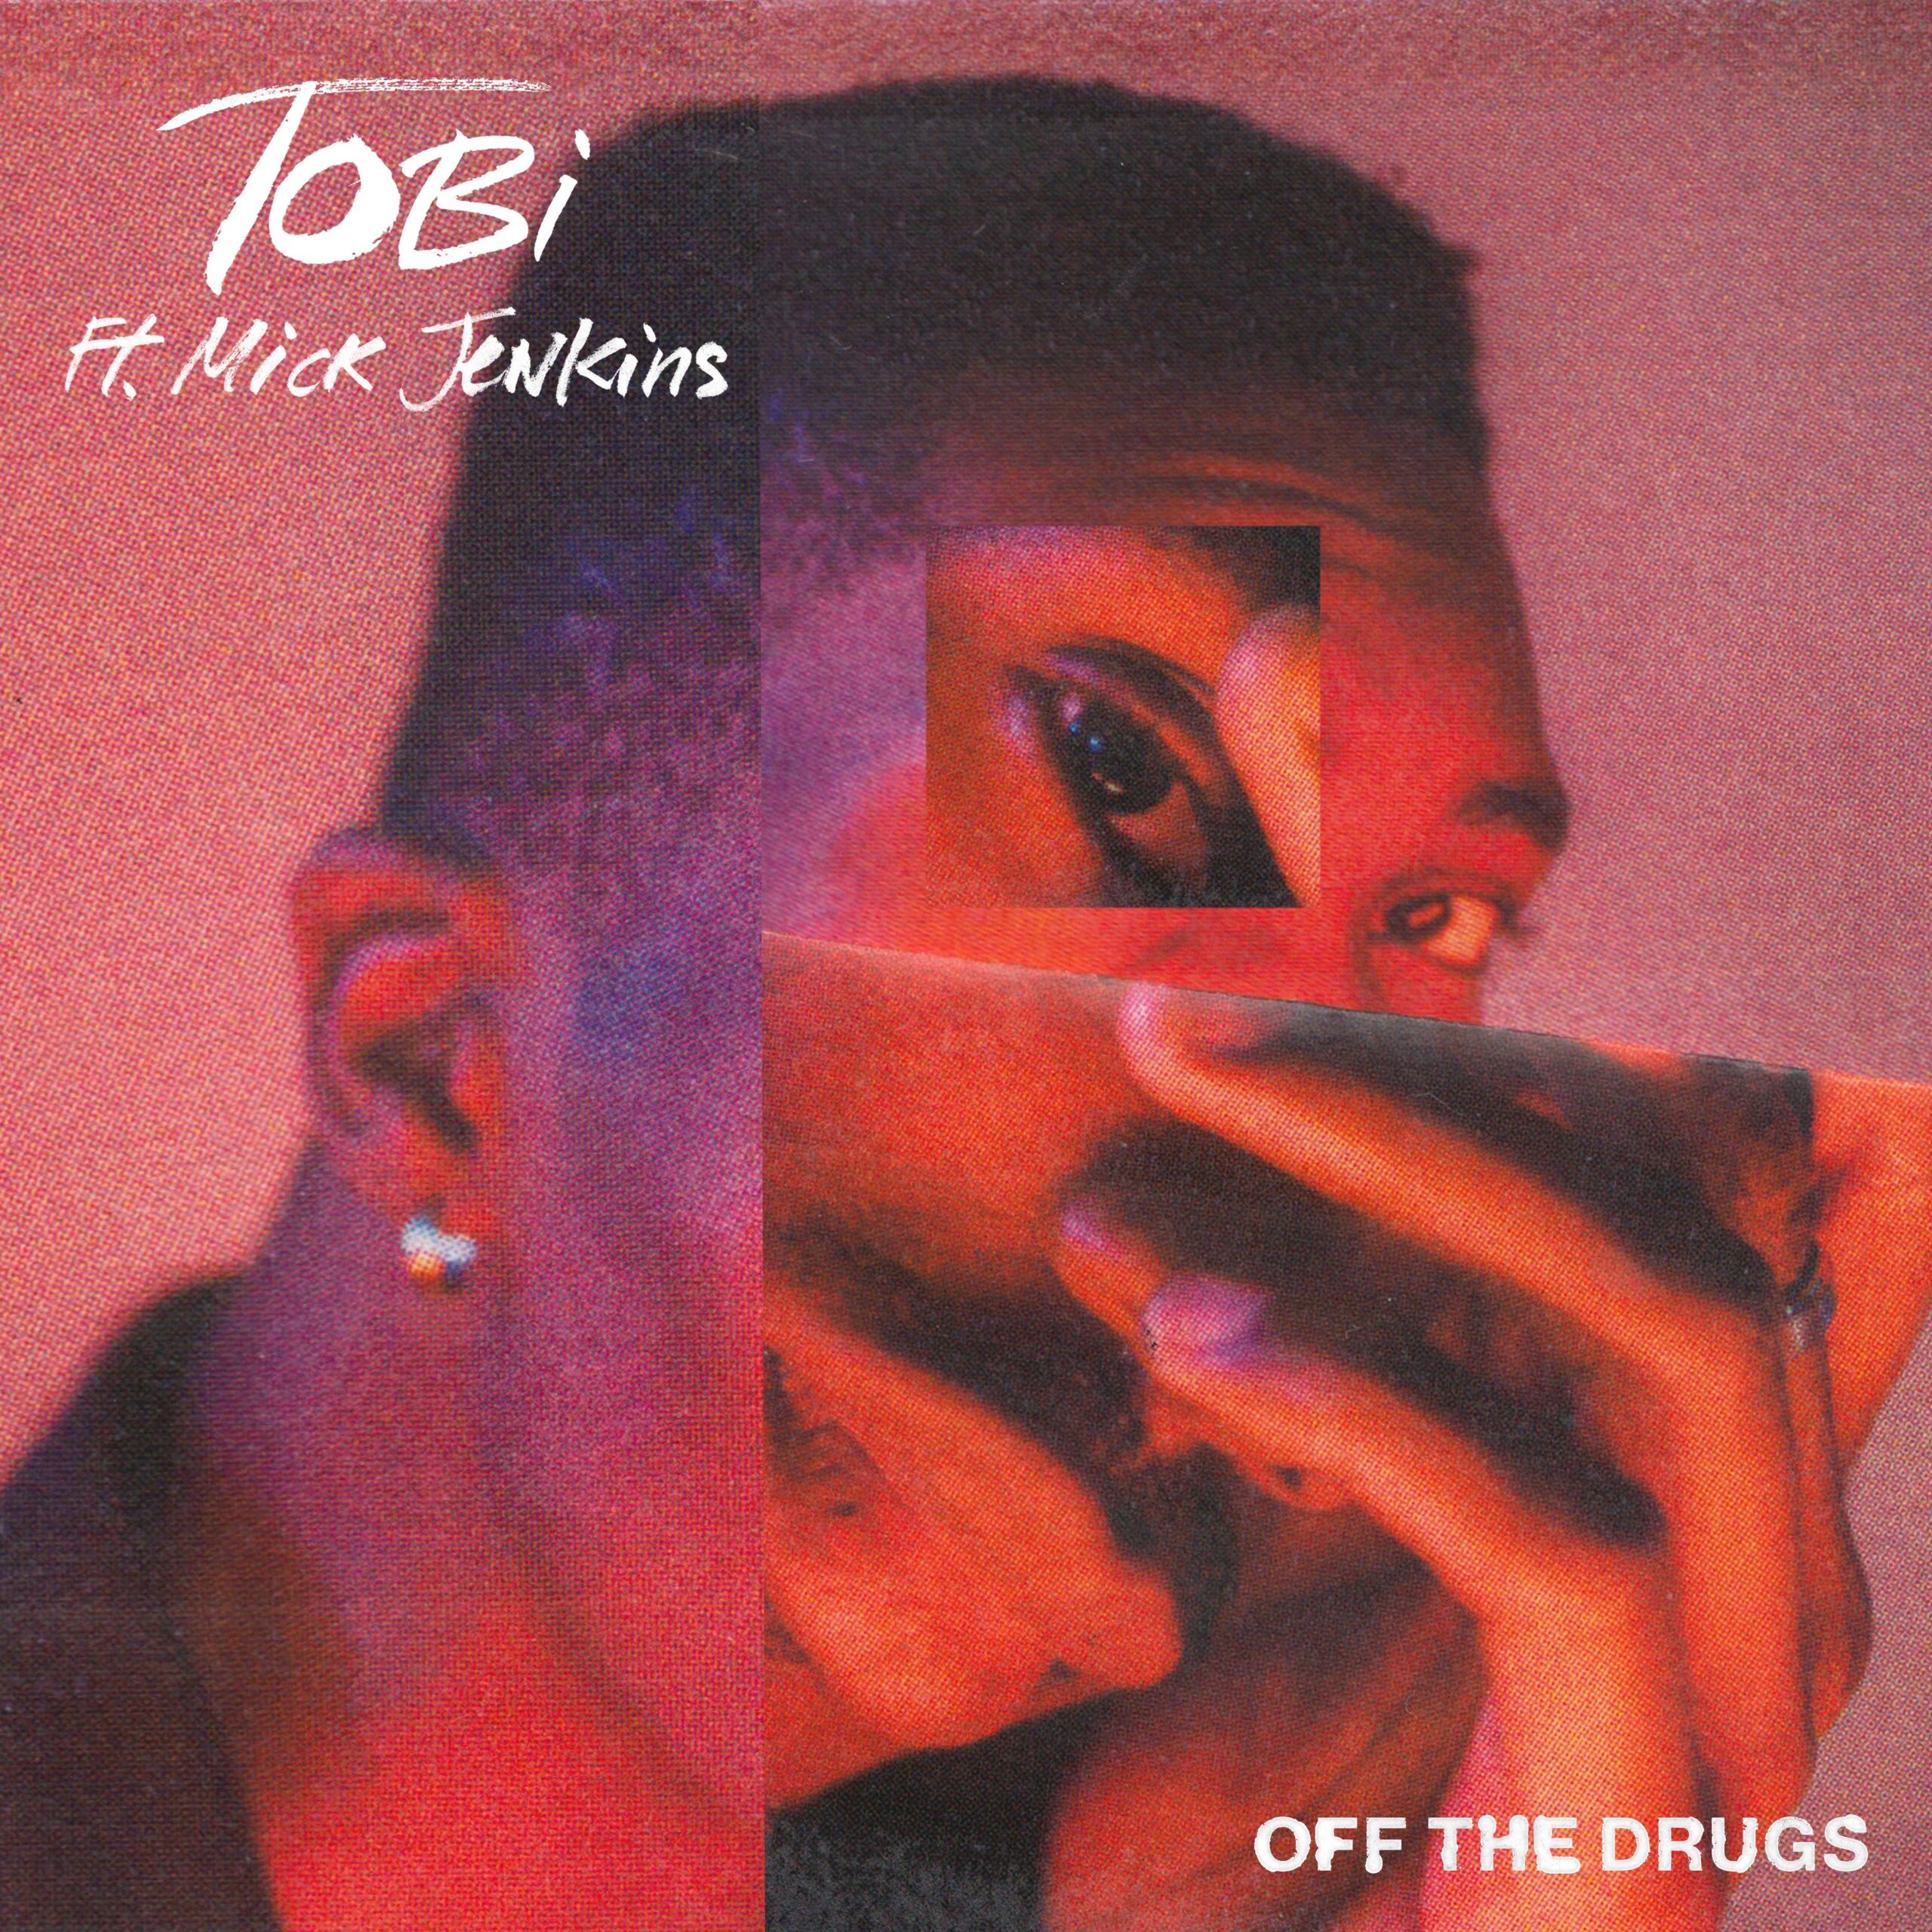 TOBi Off The Drugs album cover fro Sarah Weinstein Dennison, RCA Records for use by 360 Magazine